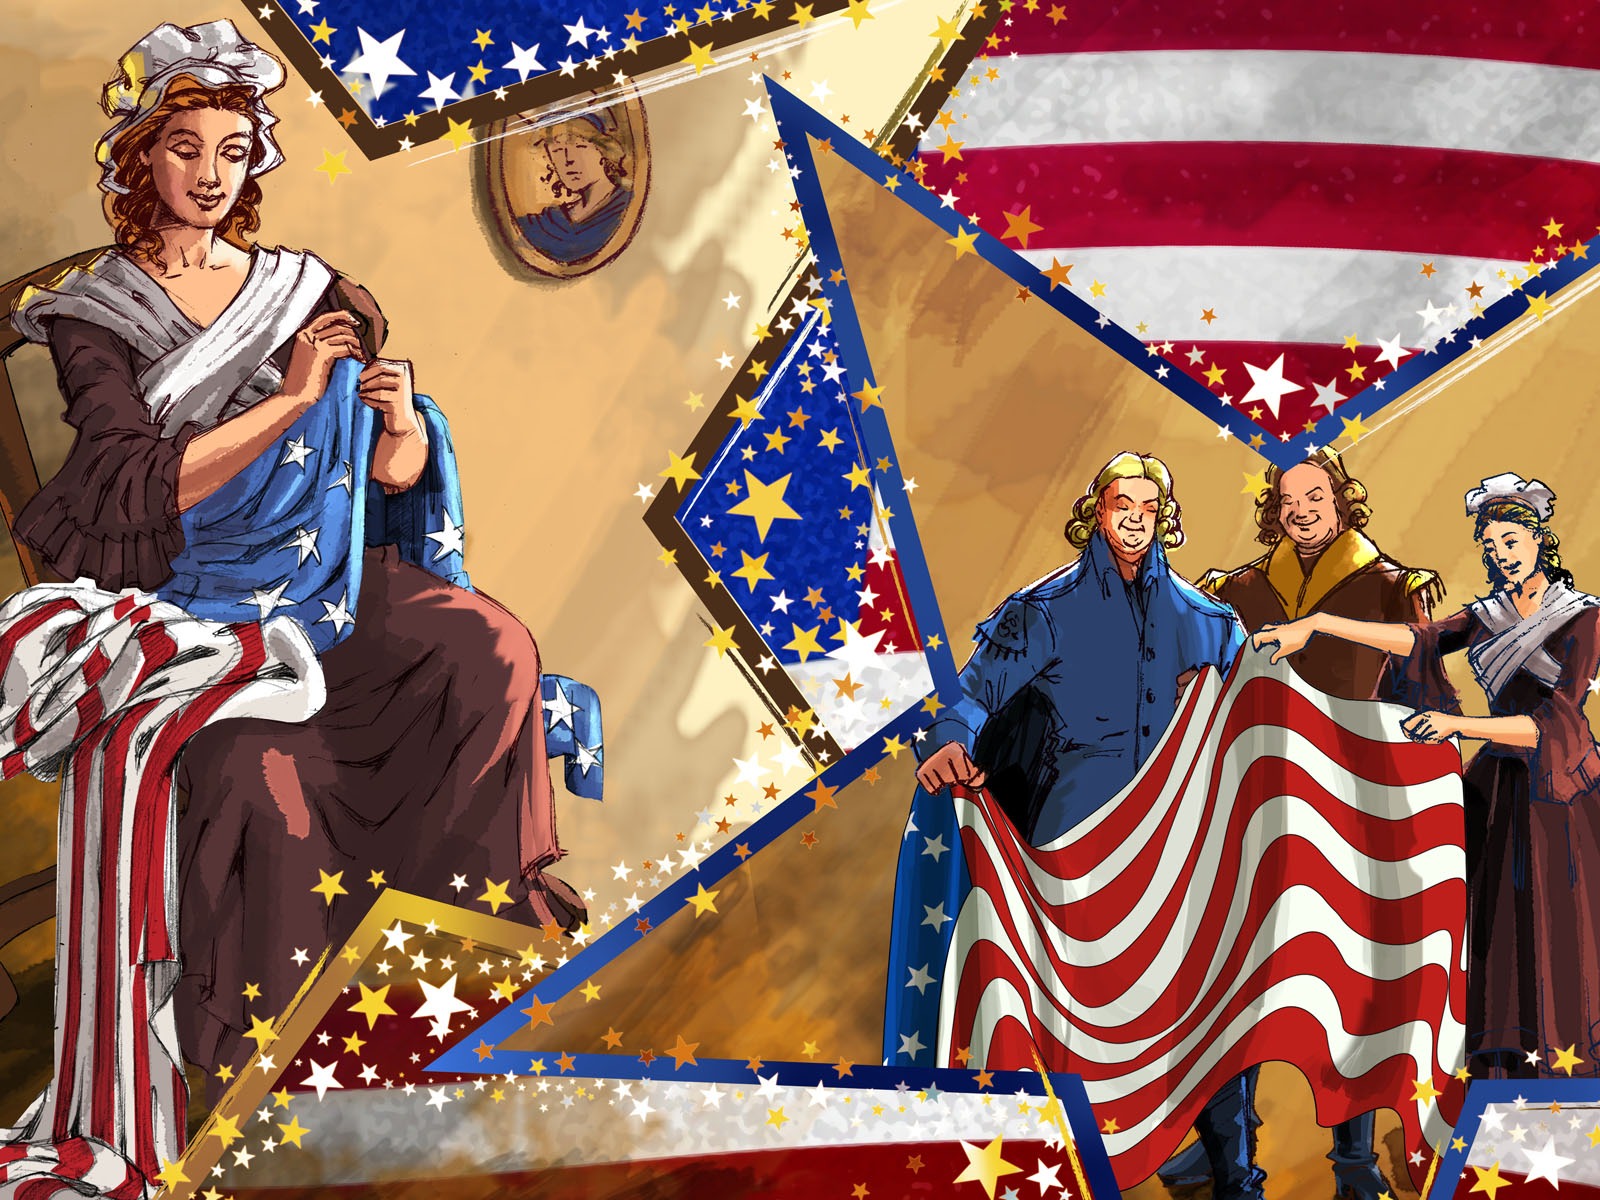 U.S. Independence Day theme wallpaper #10 - 1600x1200